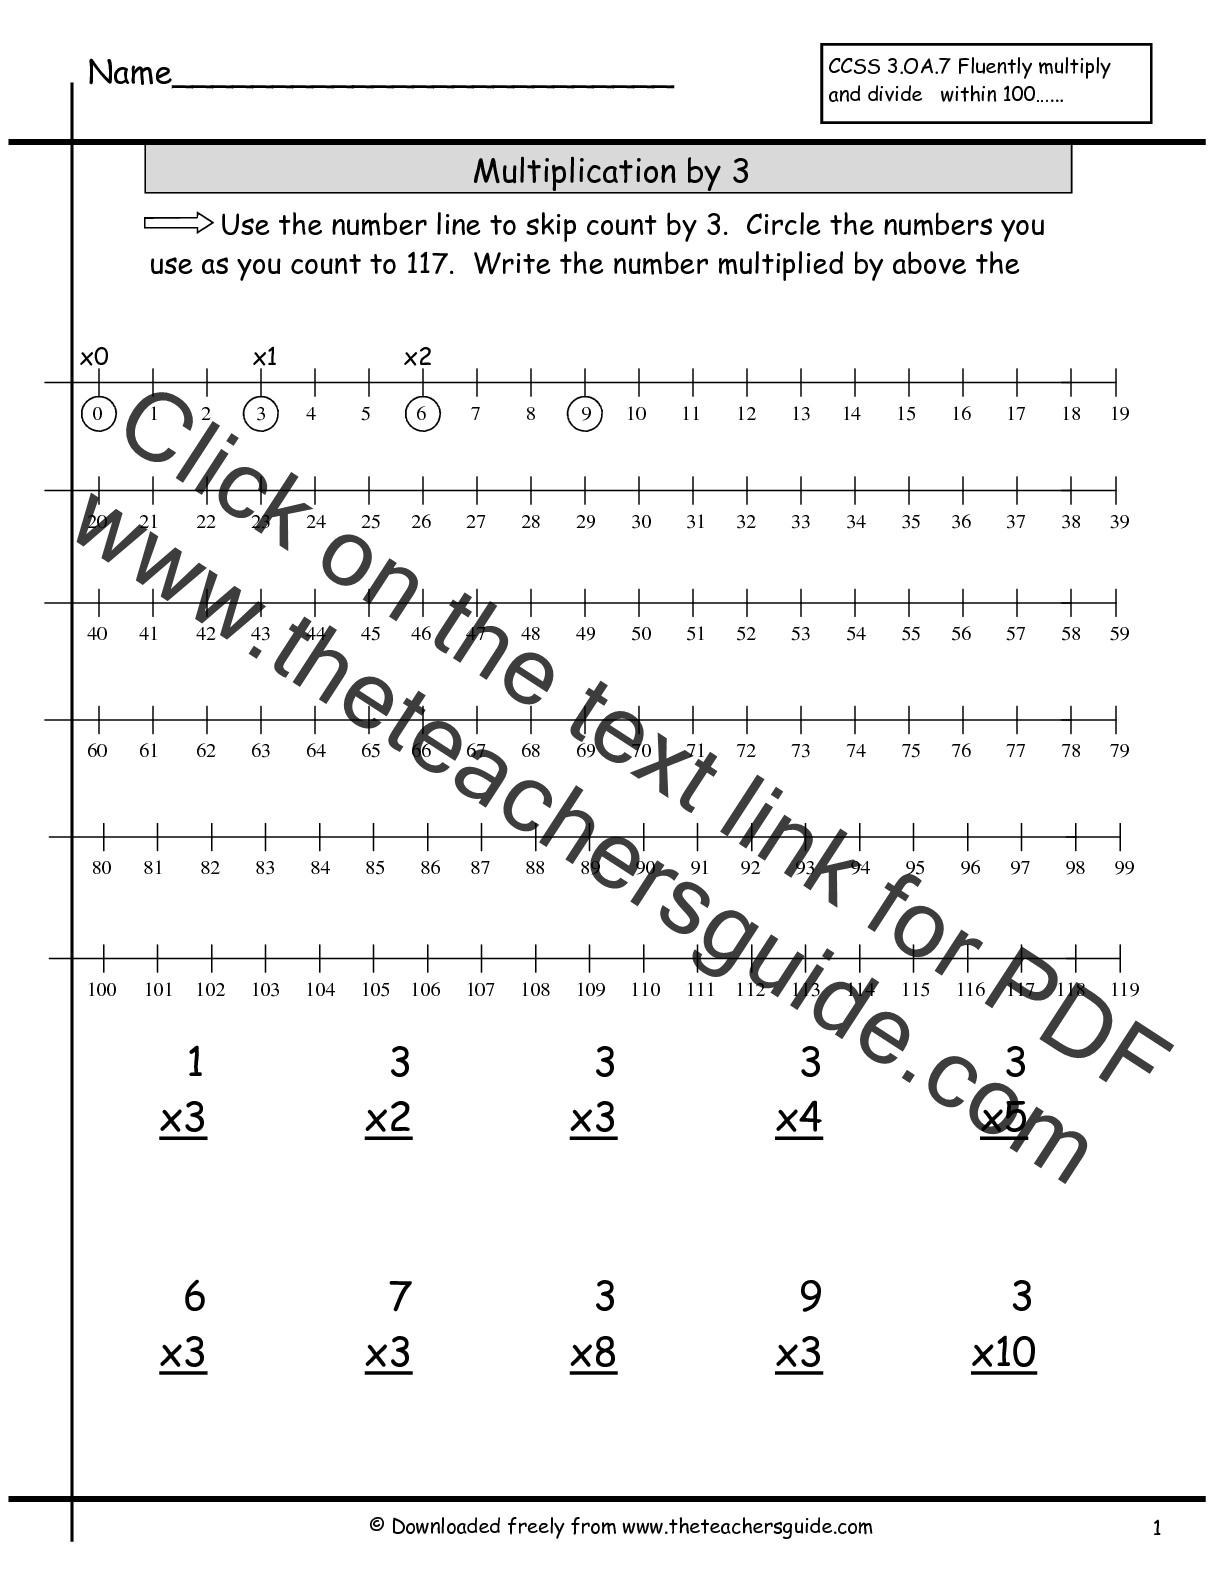 12-best-images-of-6-and-7-multiplication-worksheets-7-and-8-multiplication-worksheets